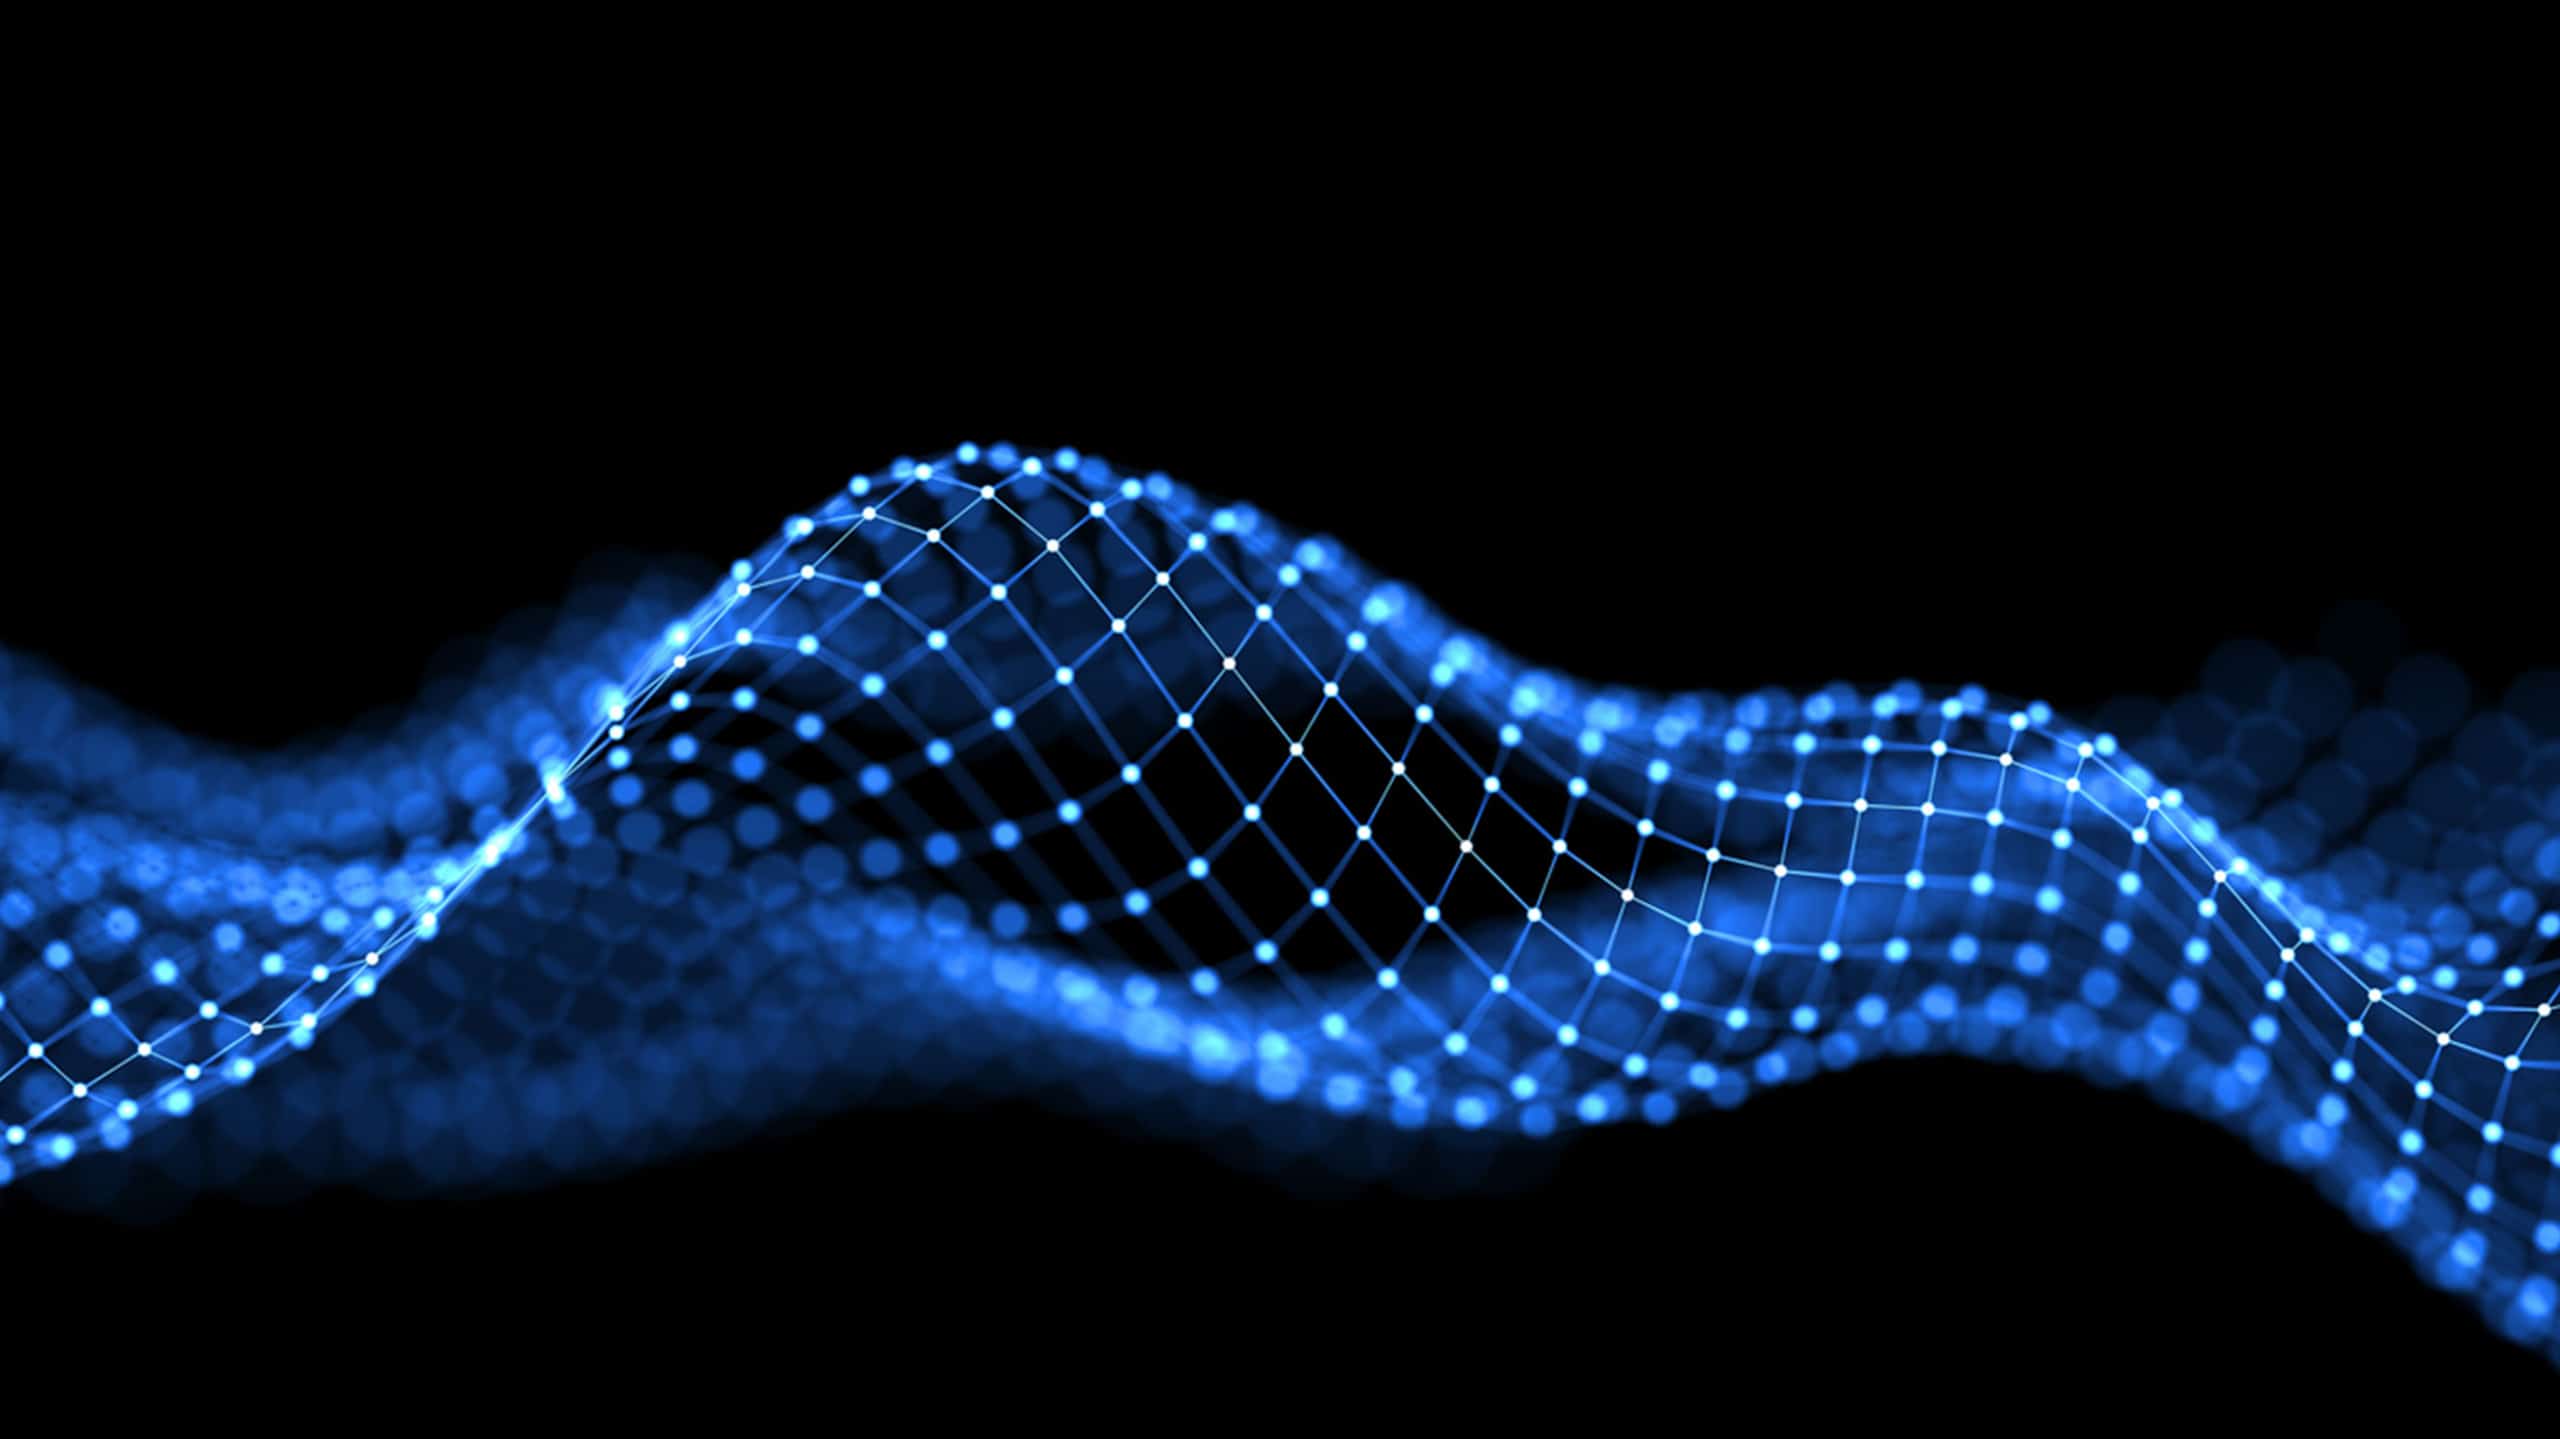 Abstract digital image showing a flowing grid of blue neon lights against a dark background, creating a dynamic wave-like pattern, enhanced with geolocation data.